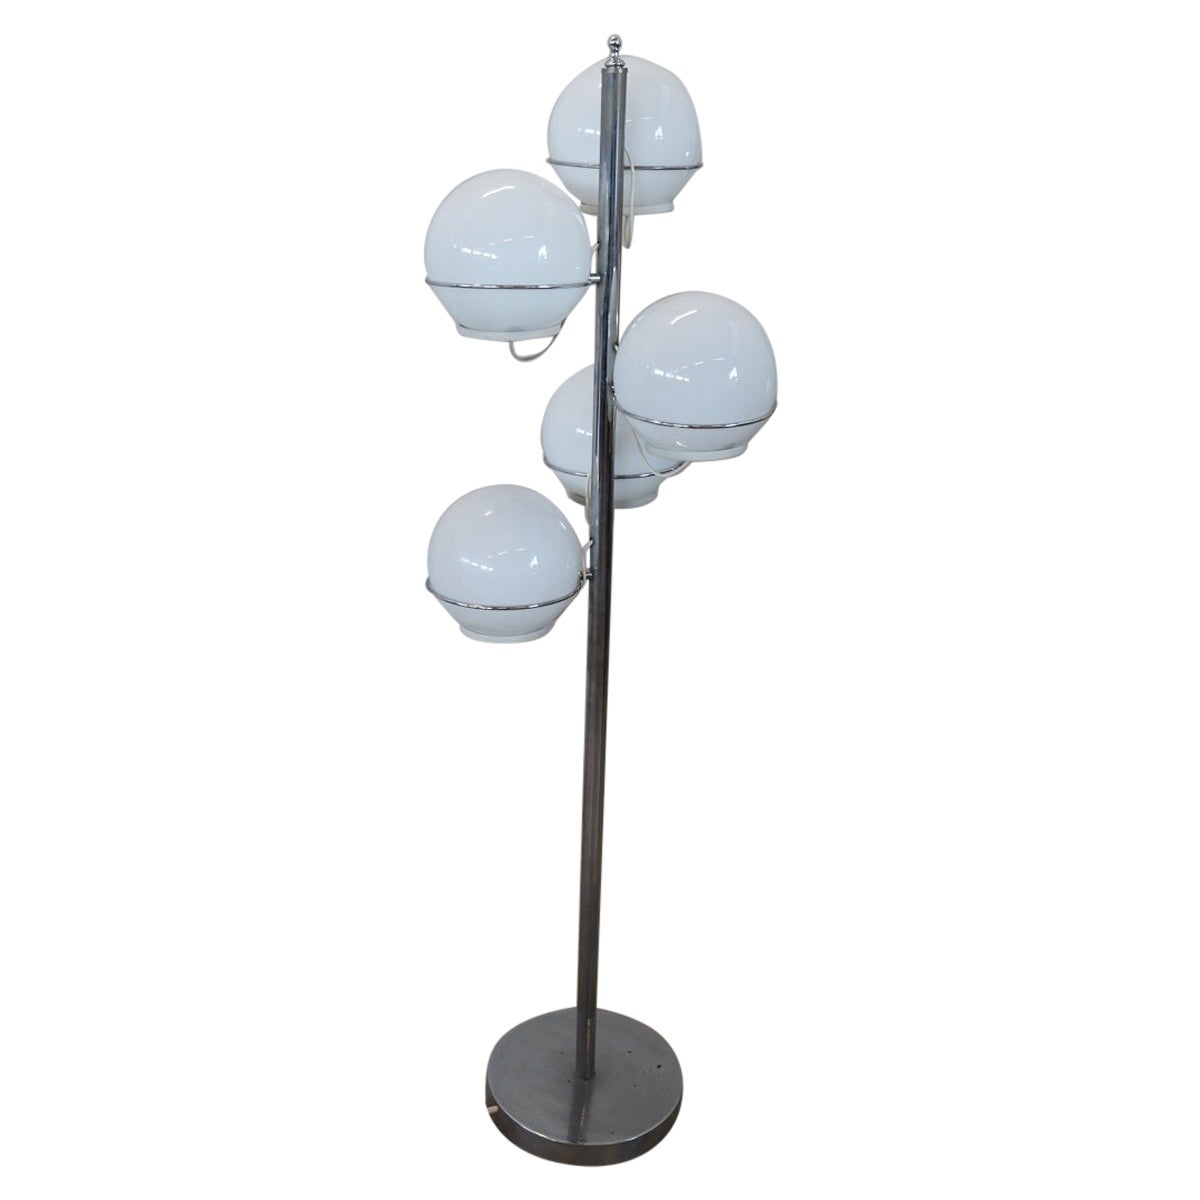 Italian Design Chromed metal and Glass Floor Lamp by Gino Sarfatti, 1960s For Sale